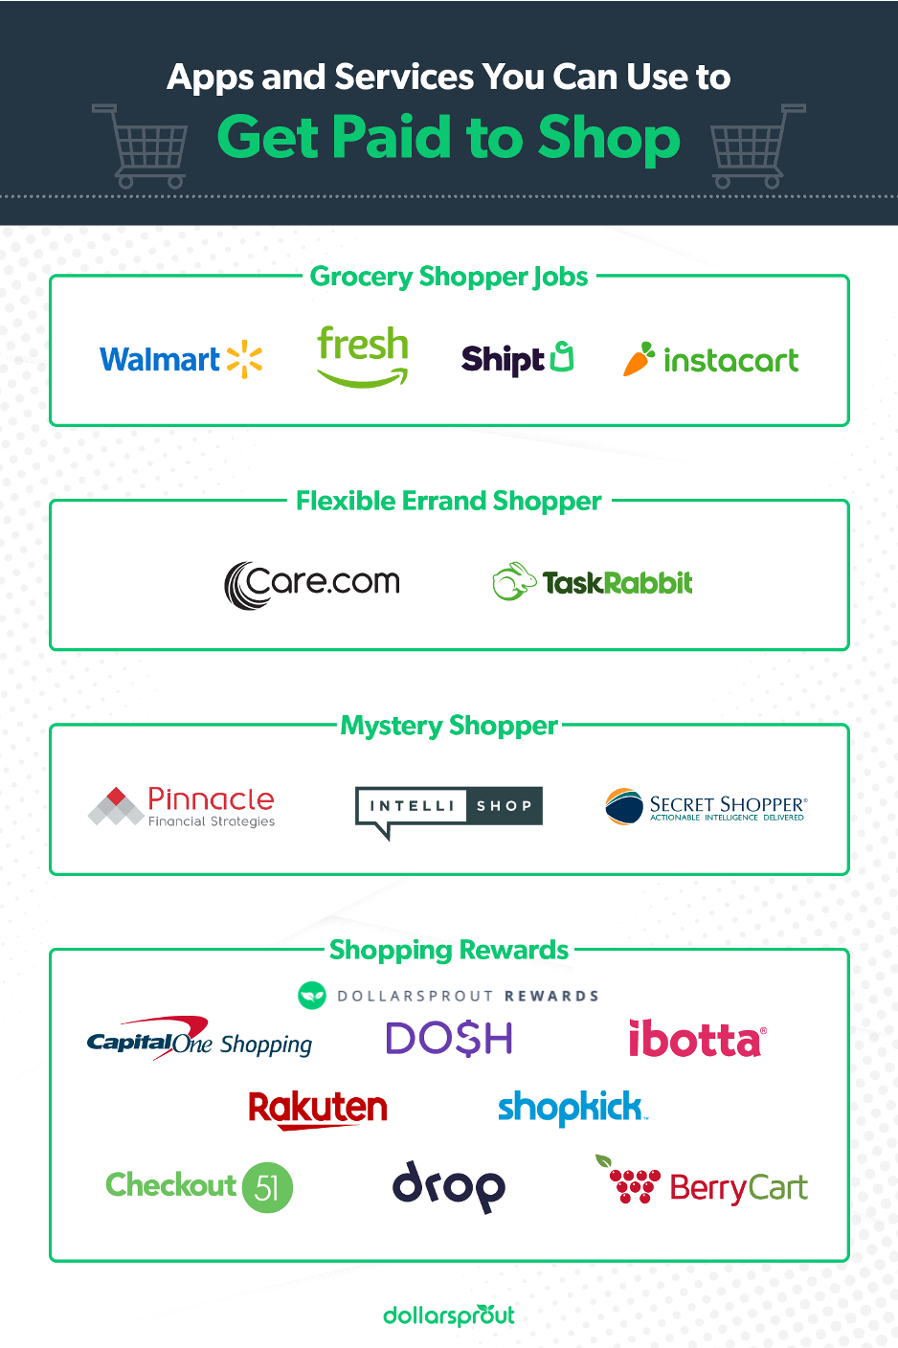 Different apps and websites that you can use to get paid to shop